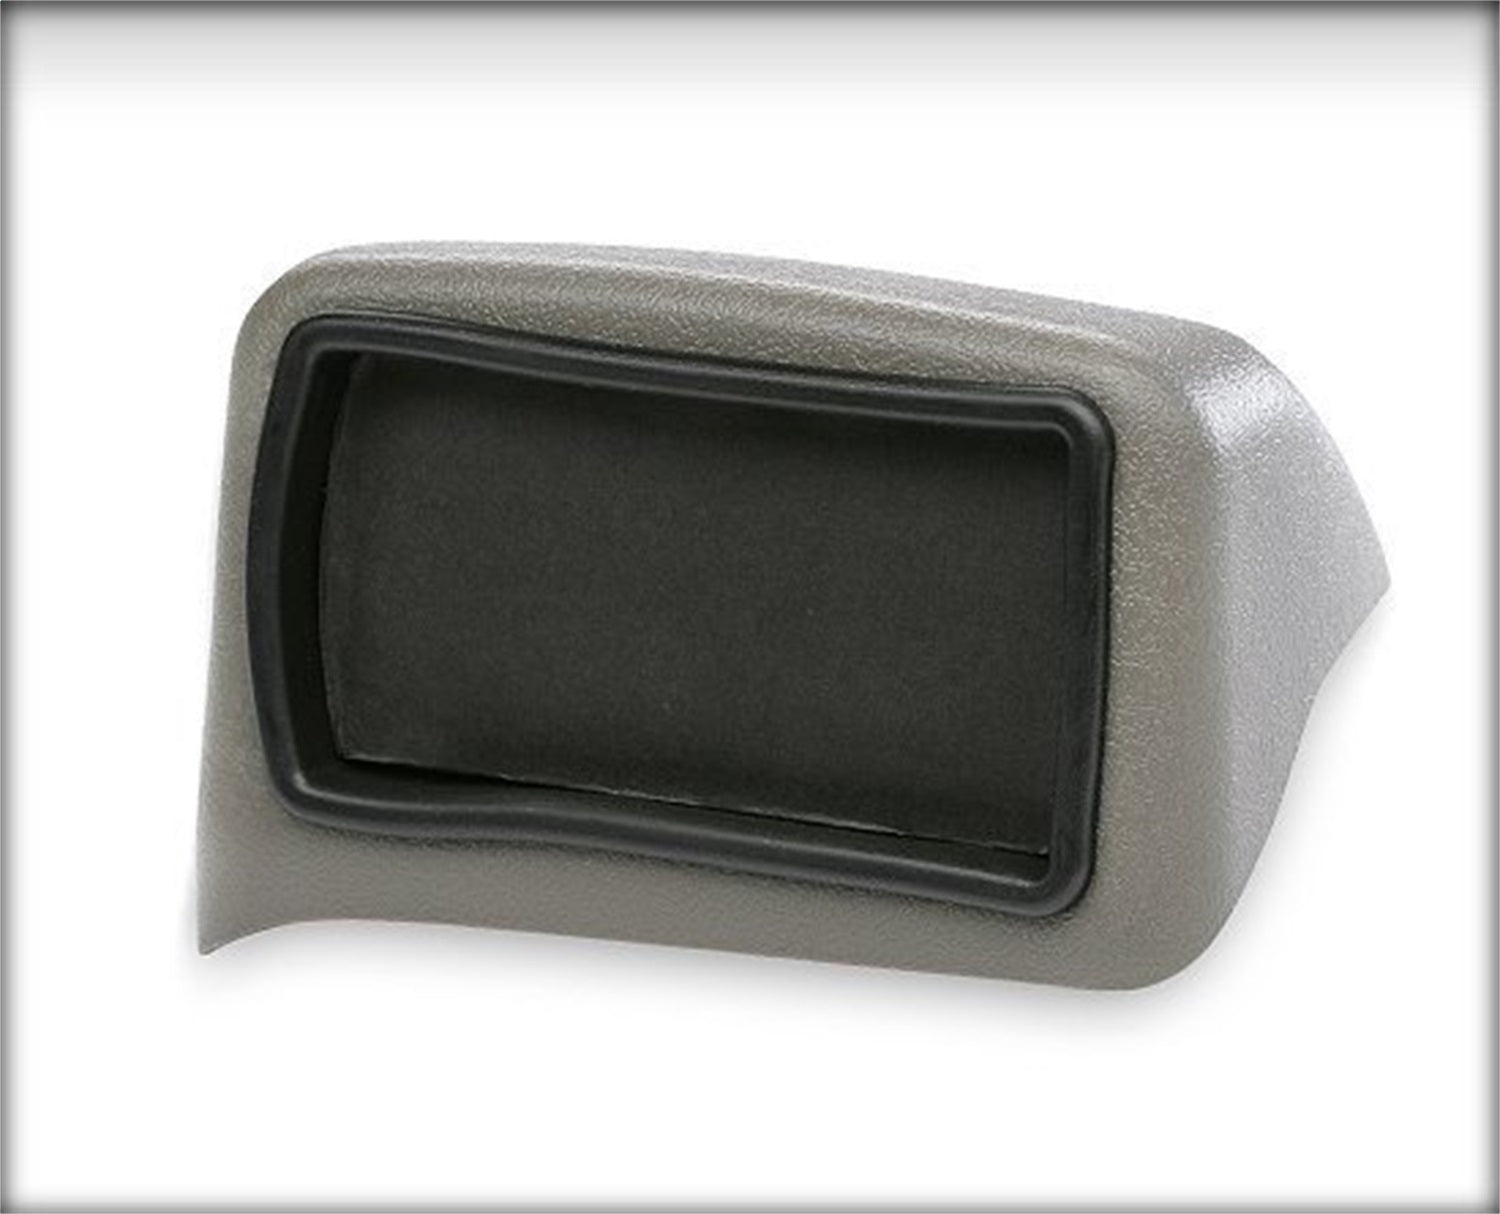 For 1999-2004 Ford f-series dash pod comes with cts and cts2 adaptors